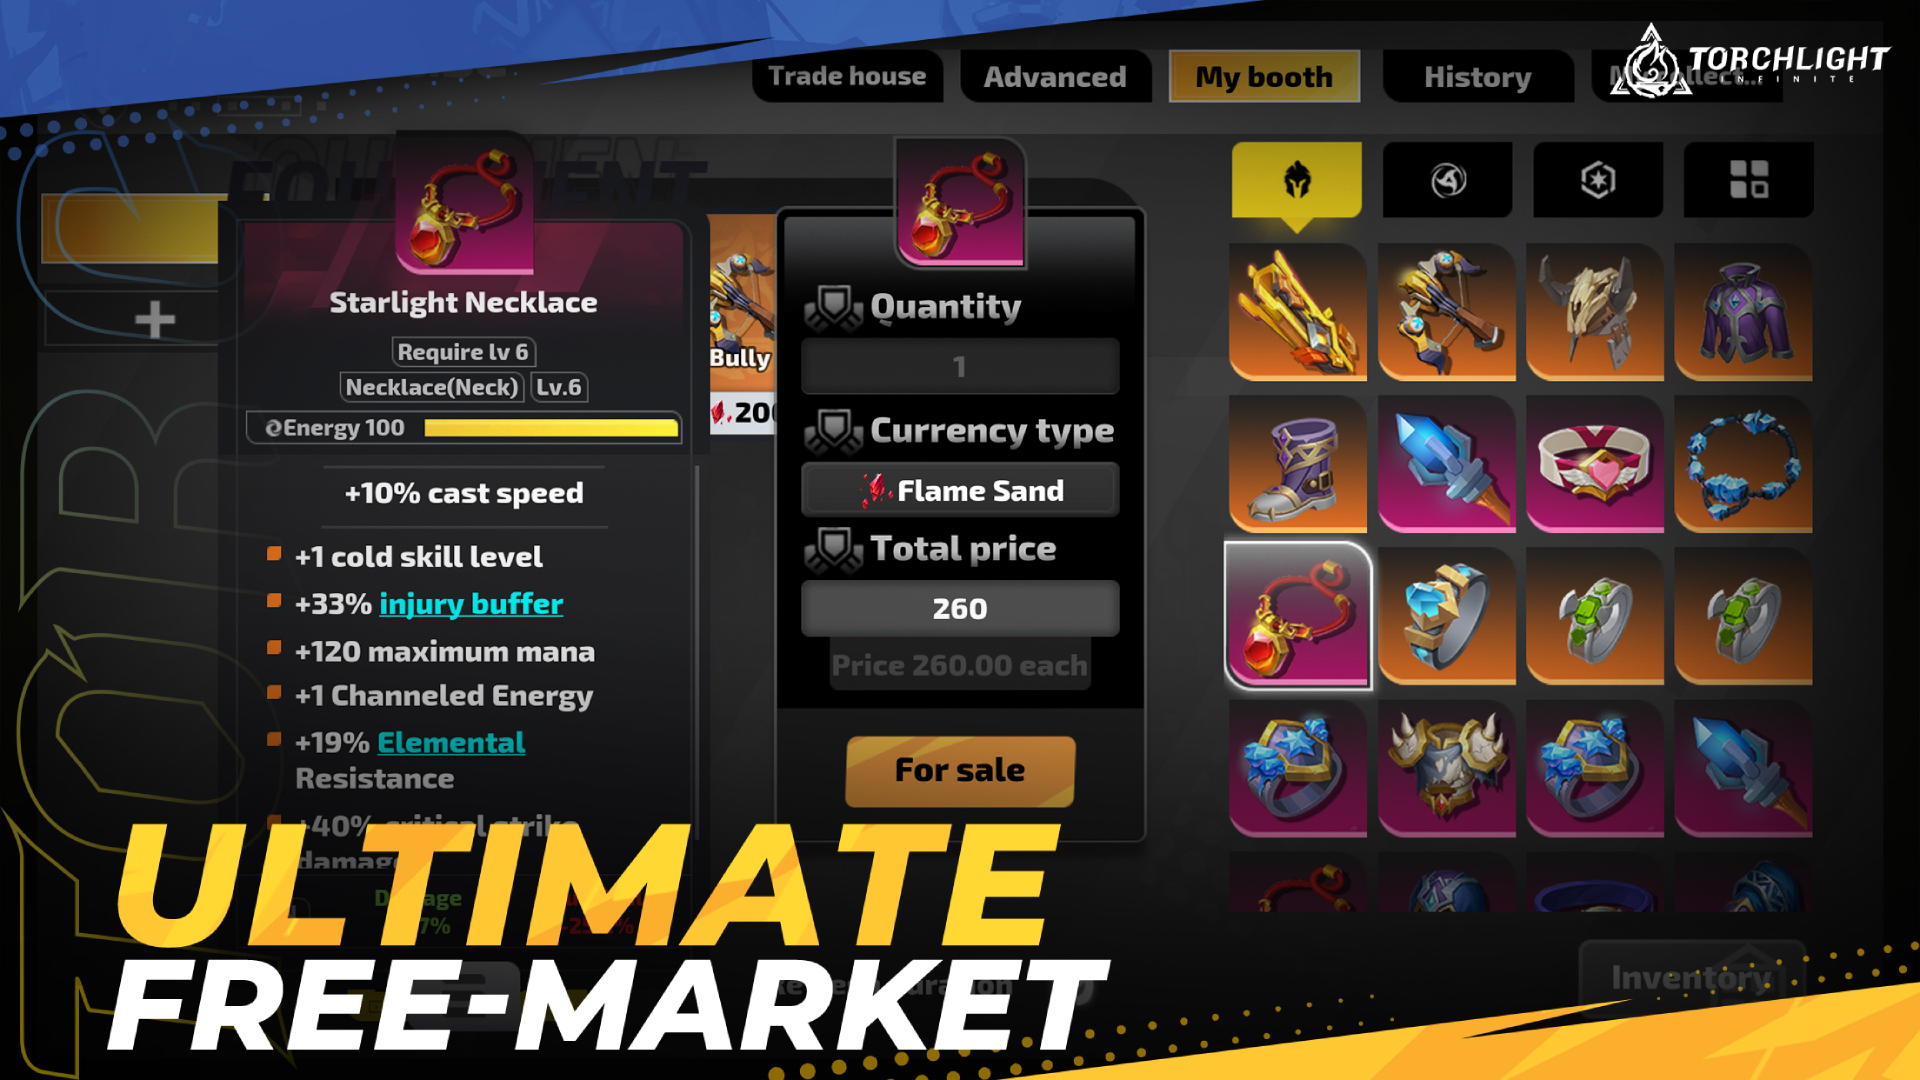 Free market in Torchlight: Infinite - 5 Things You Need To Know